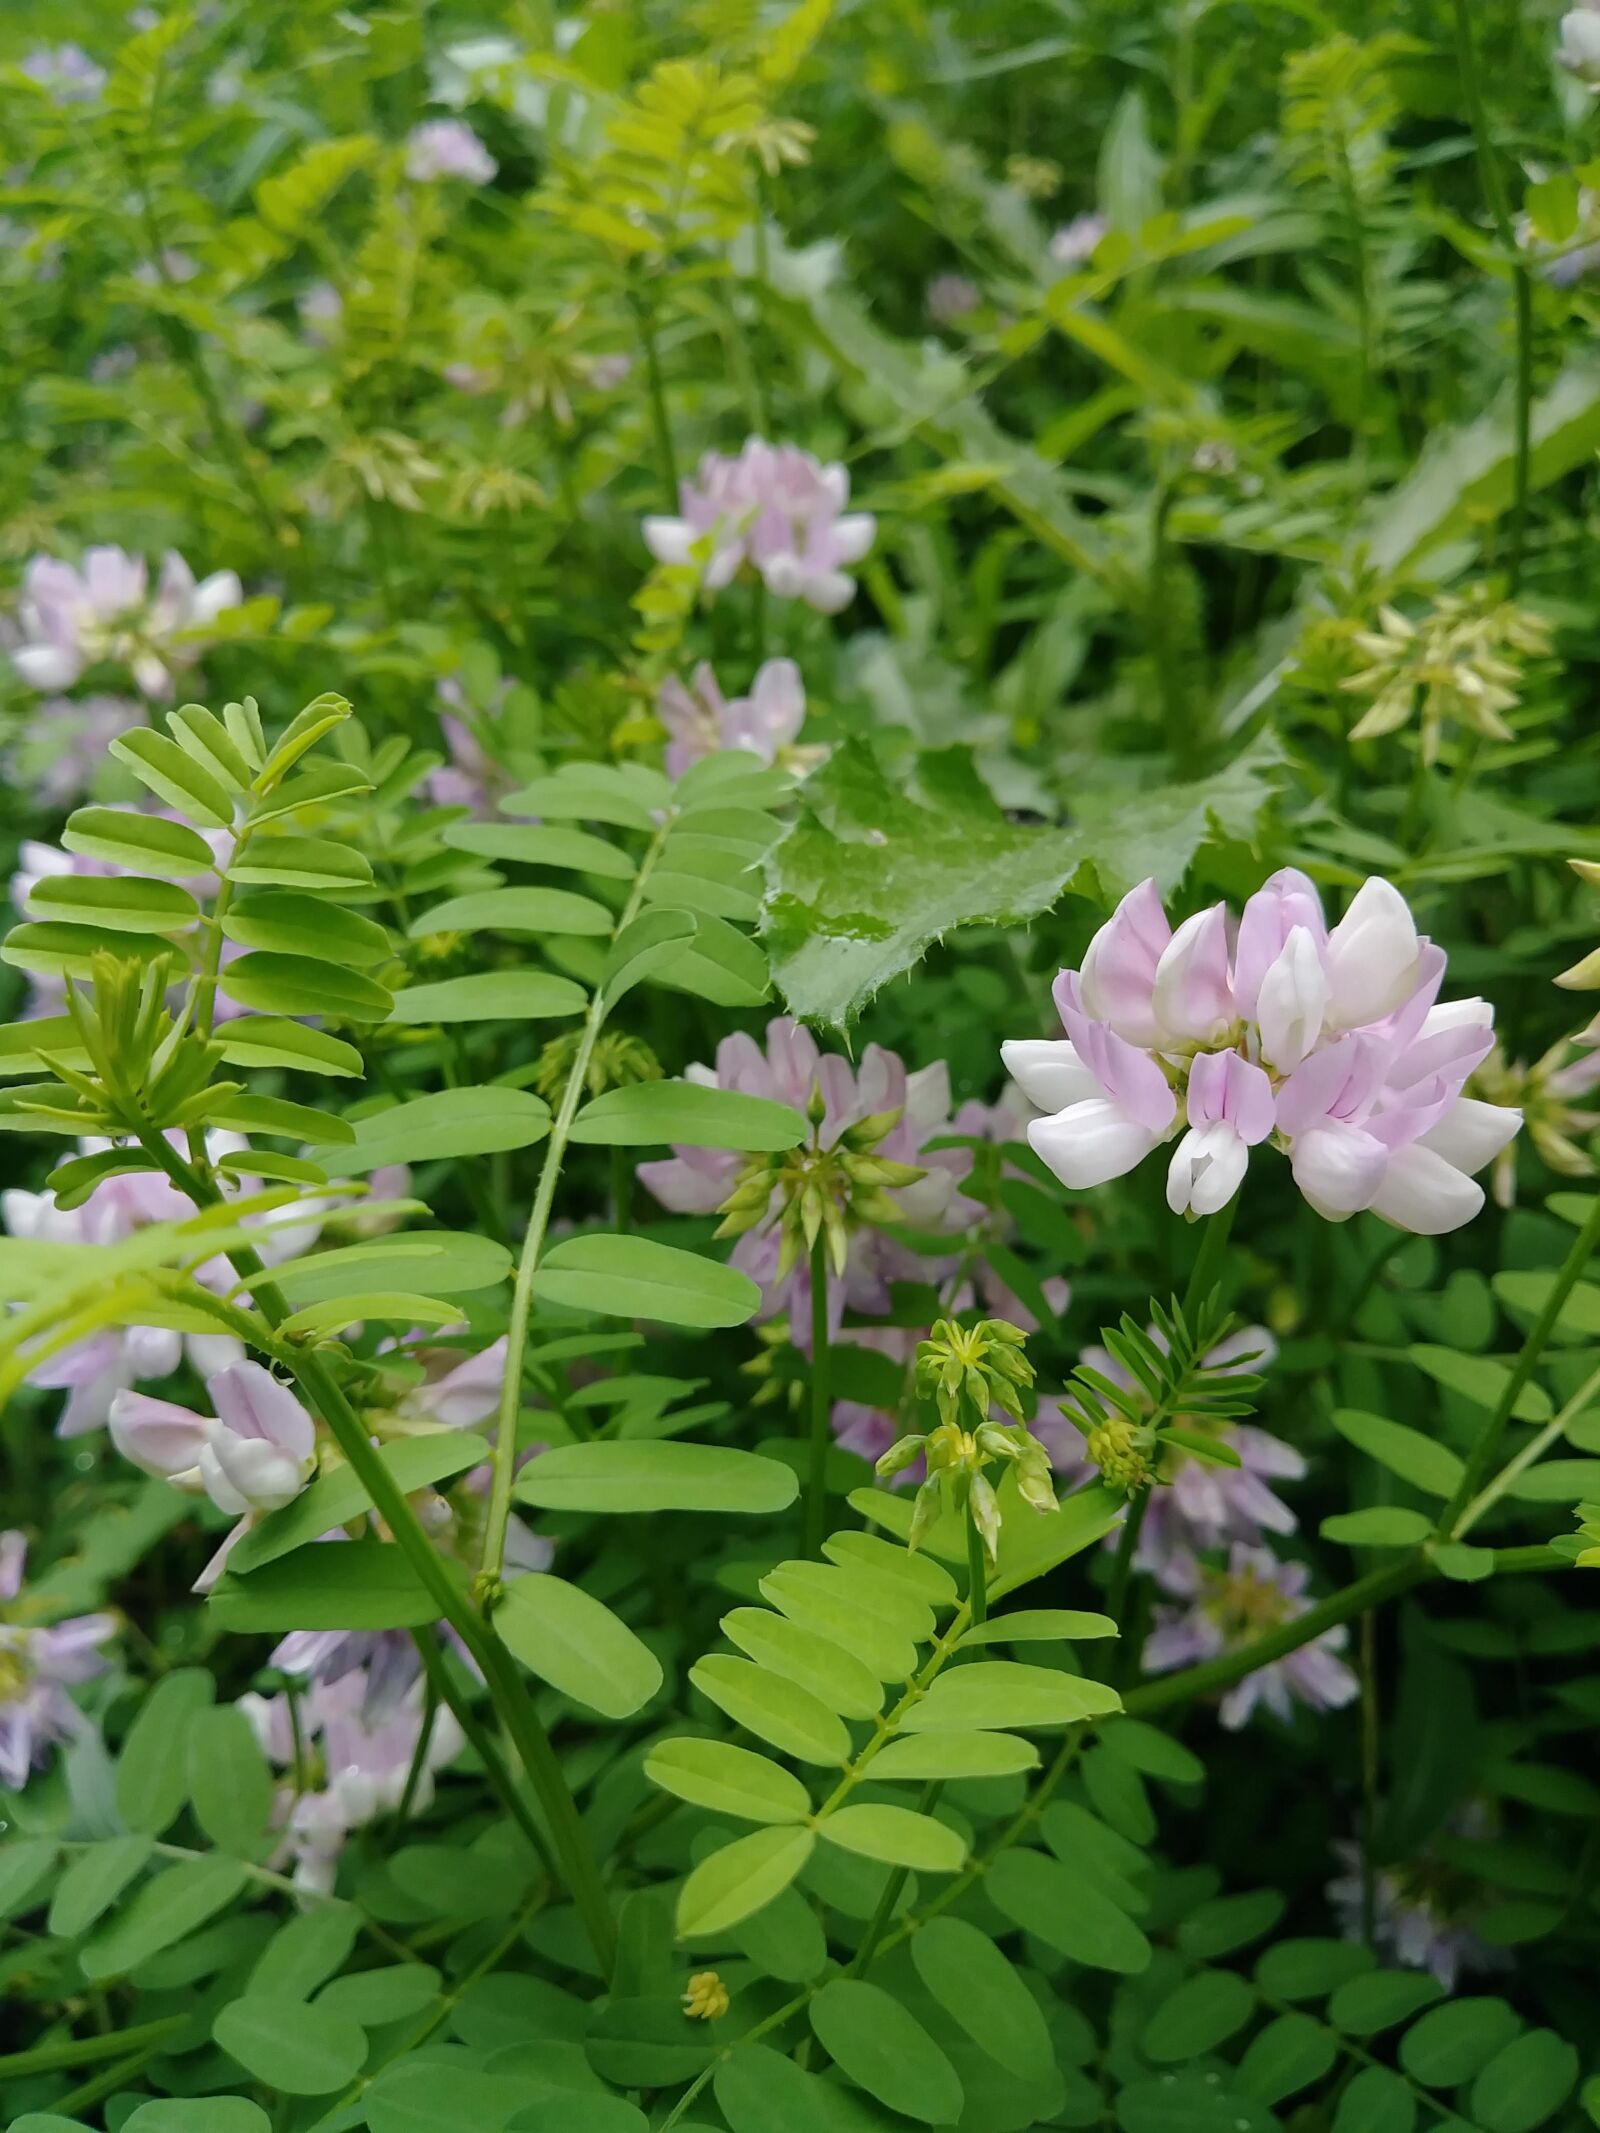 LG STYLO 3 PLUS sample photo. Clover, weeds, wildflowers photography